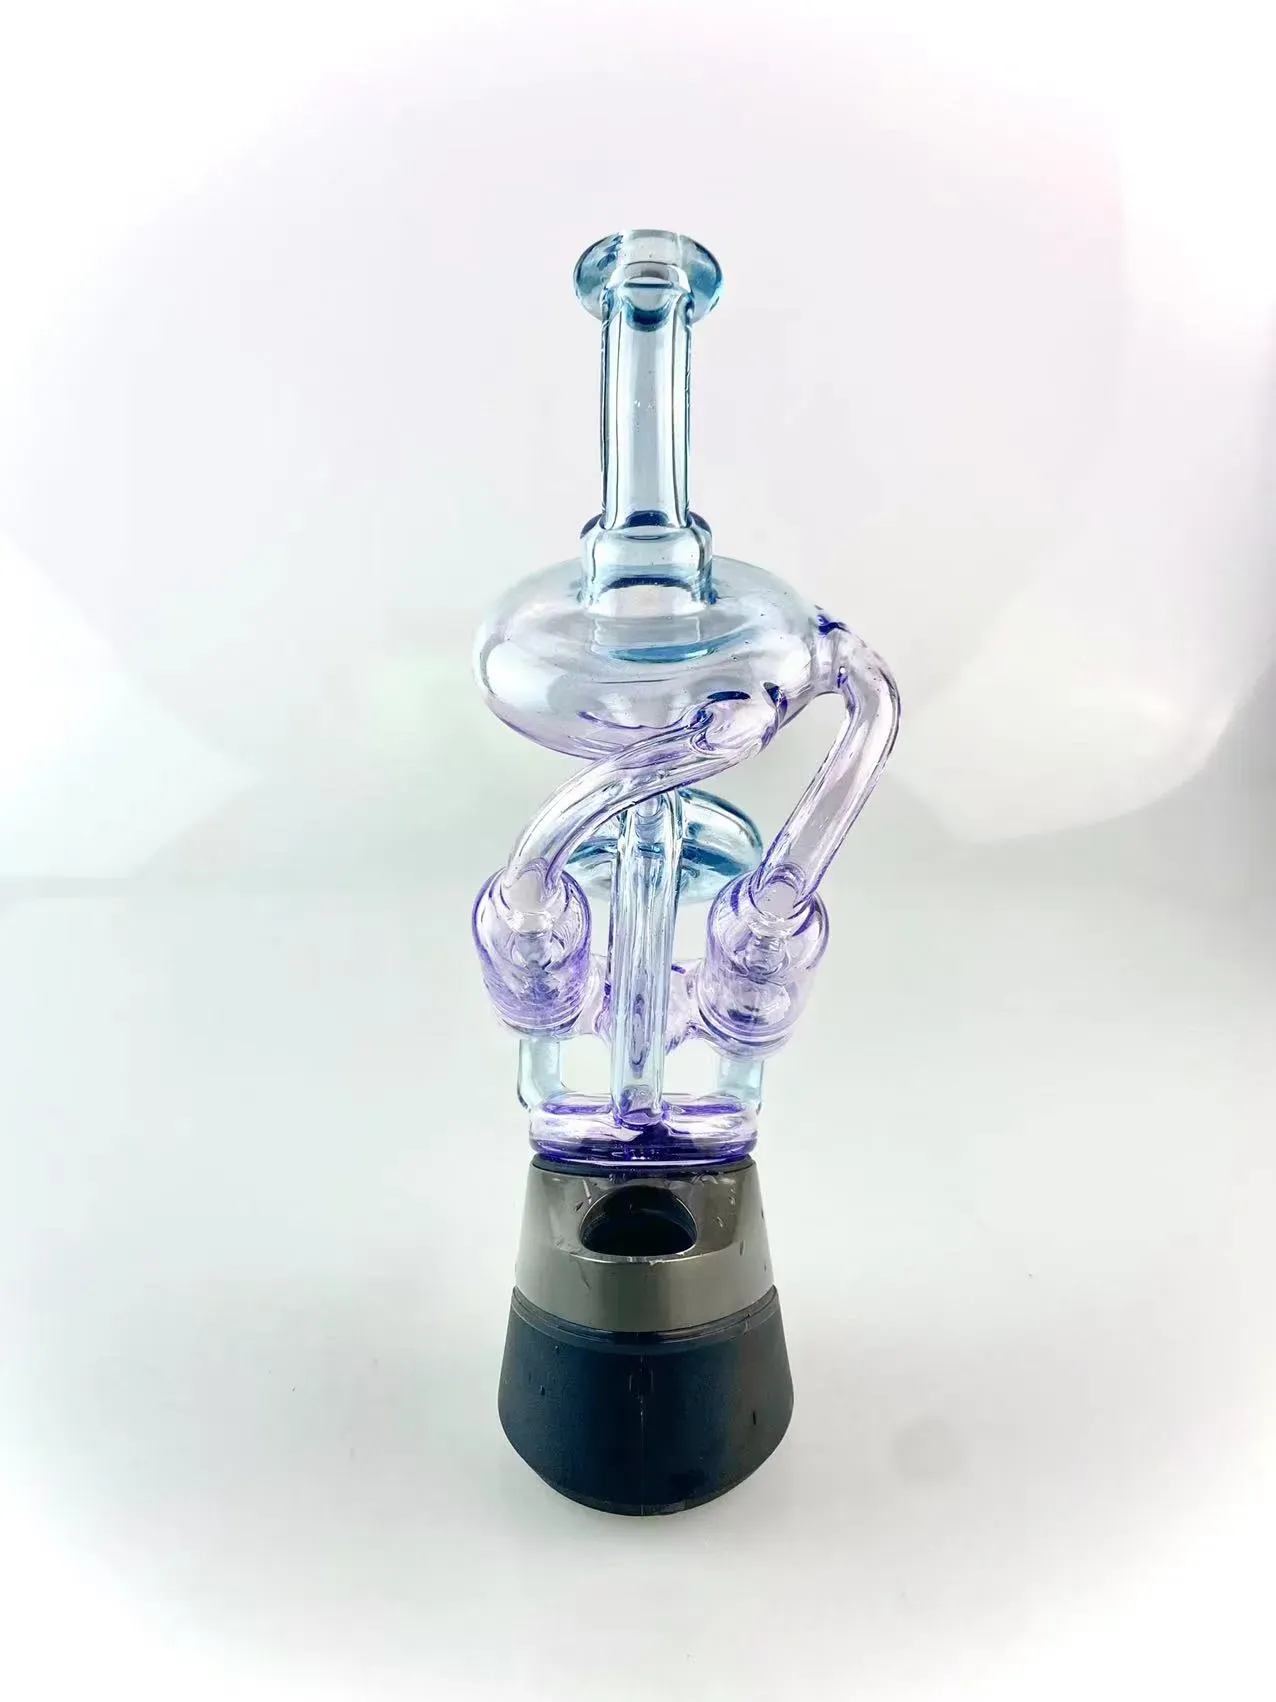 Hookah double recycler type glass top for peak or carta , purple lolipop with blue stardust , only glass top no e-rig bottom